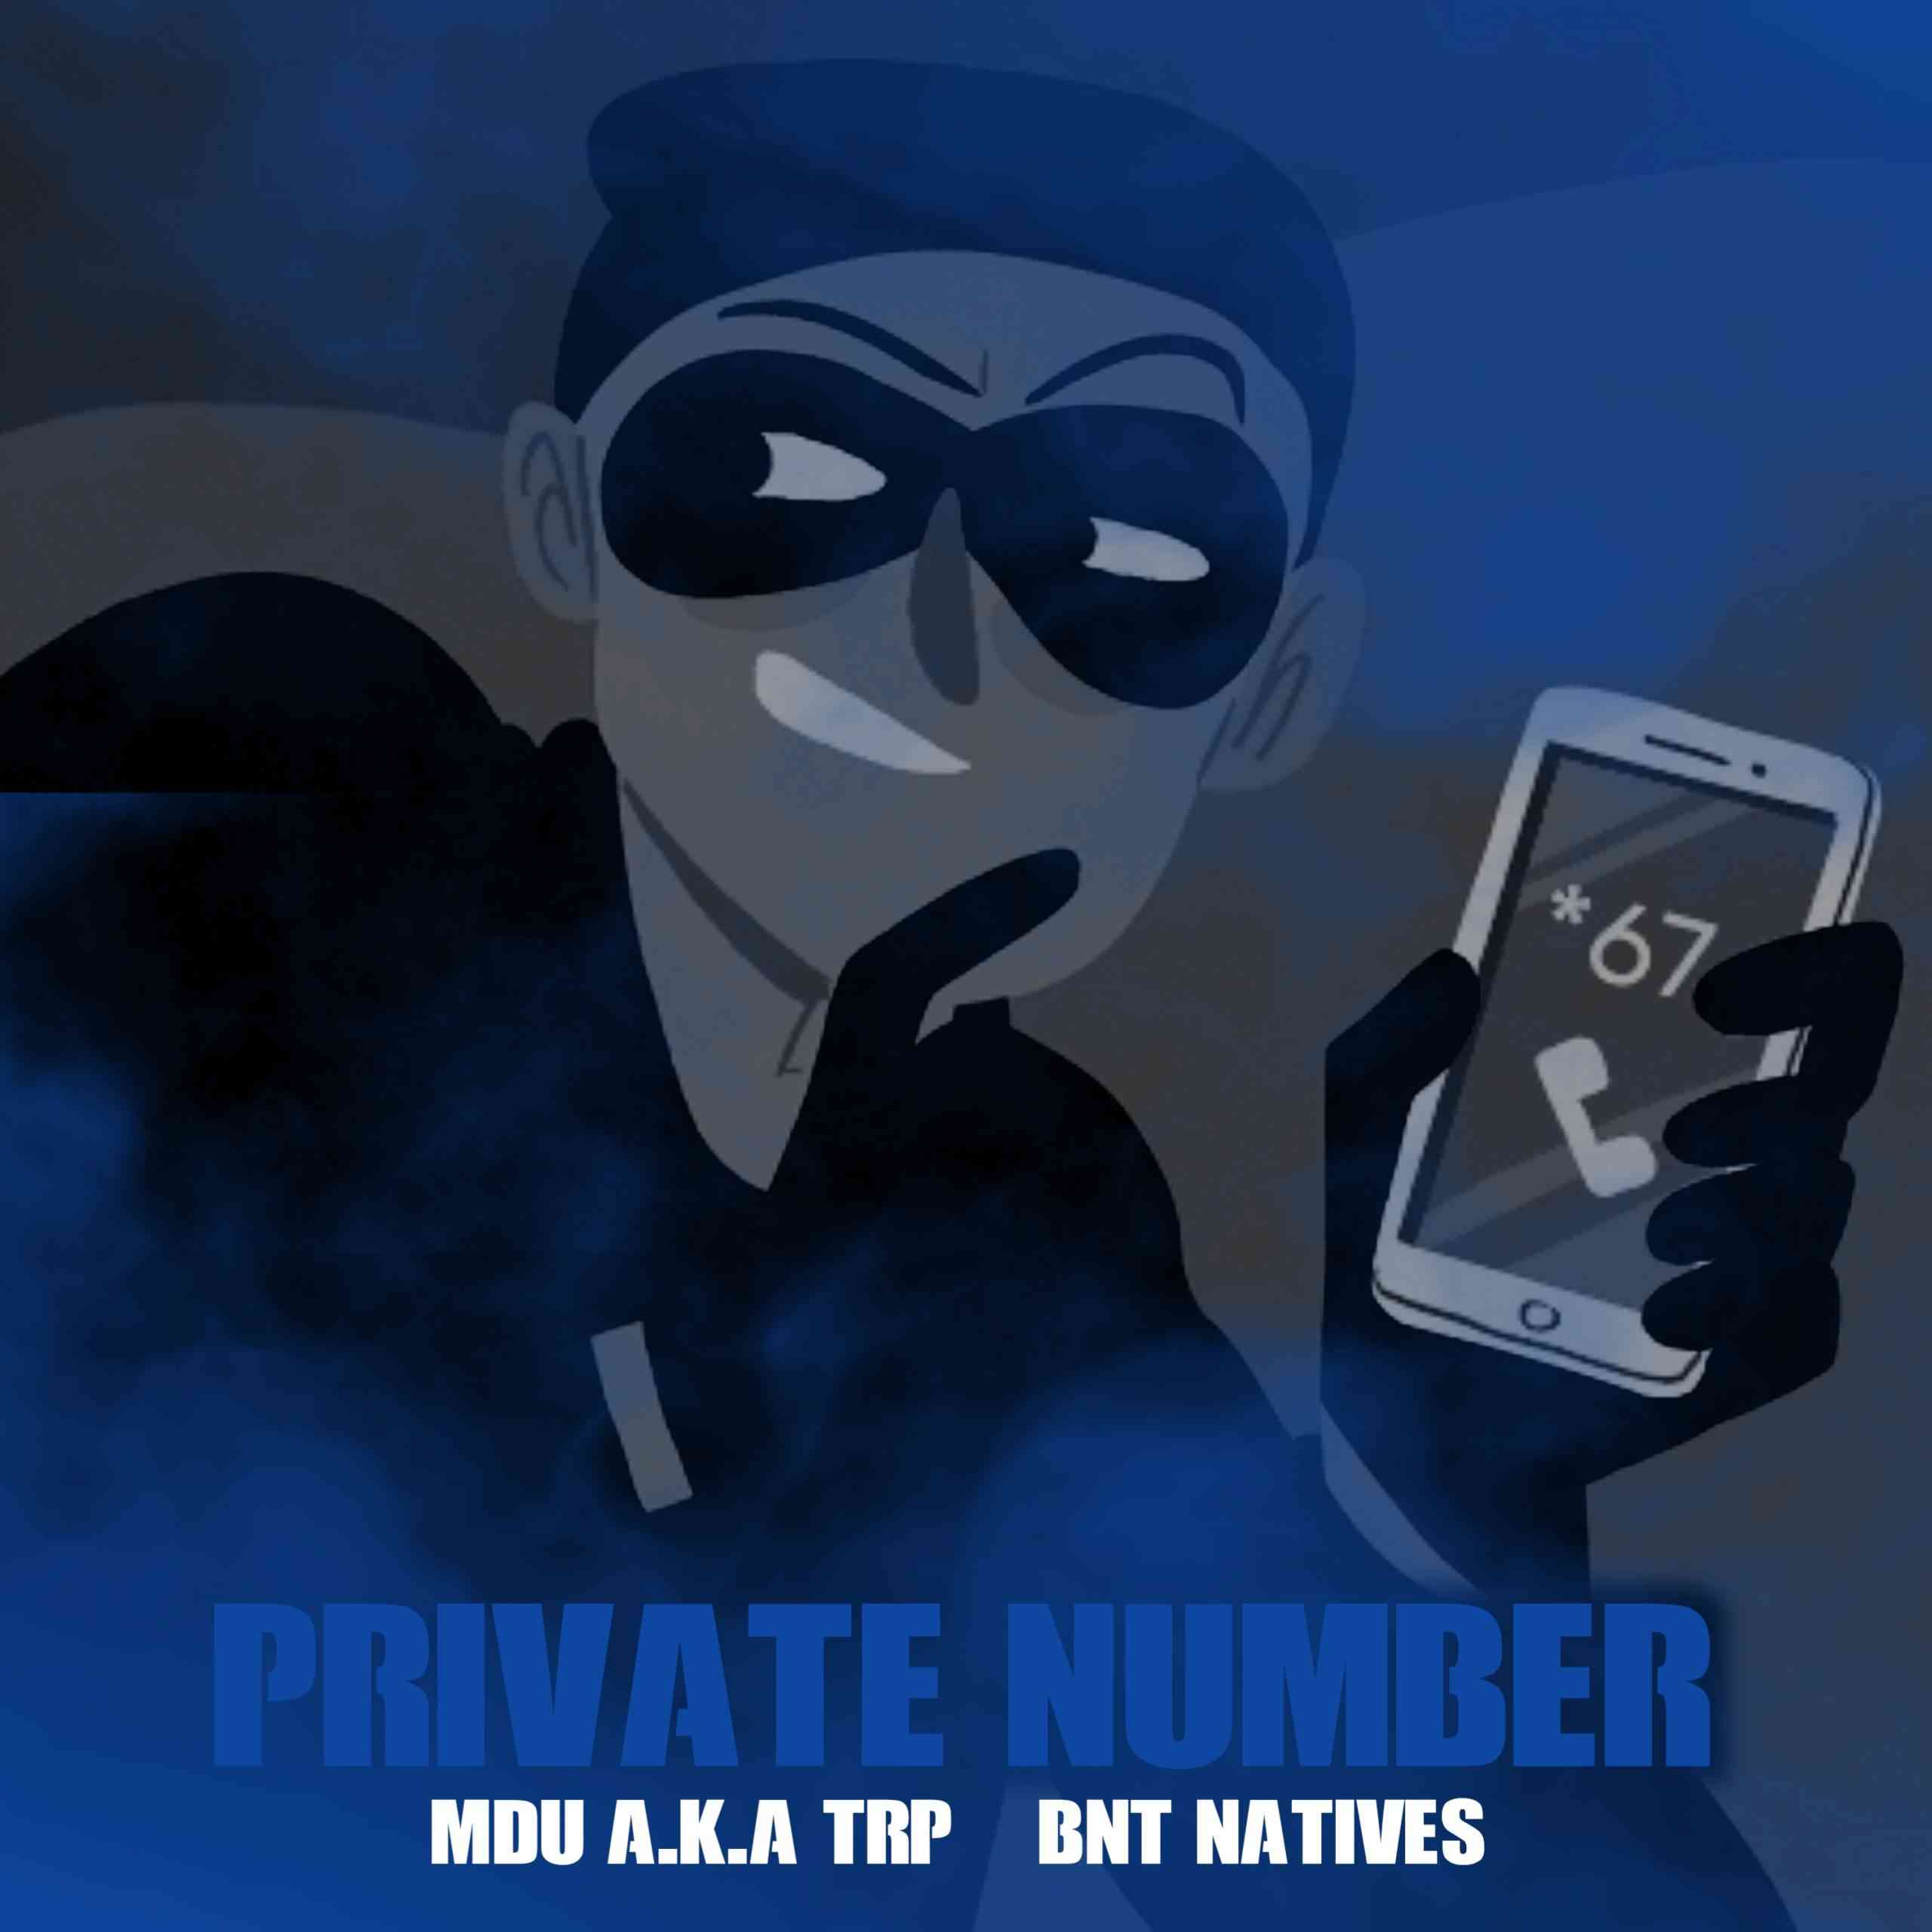 BNT Natives & Mdu aka Trp Private Number